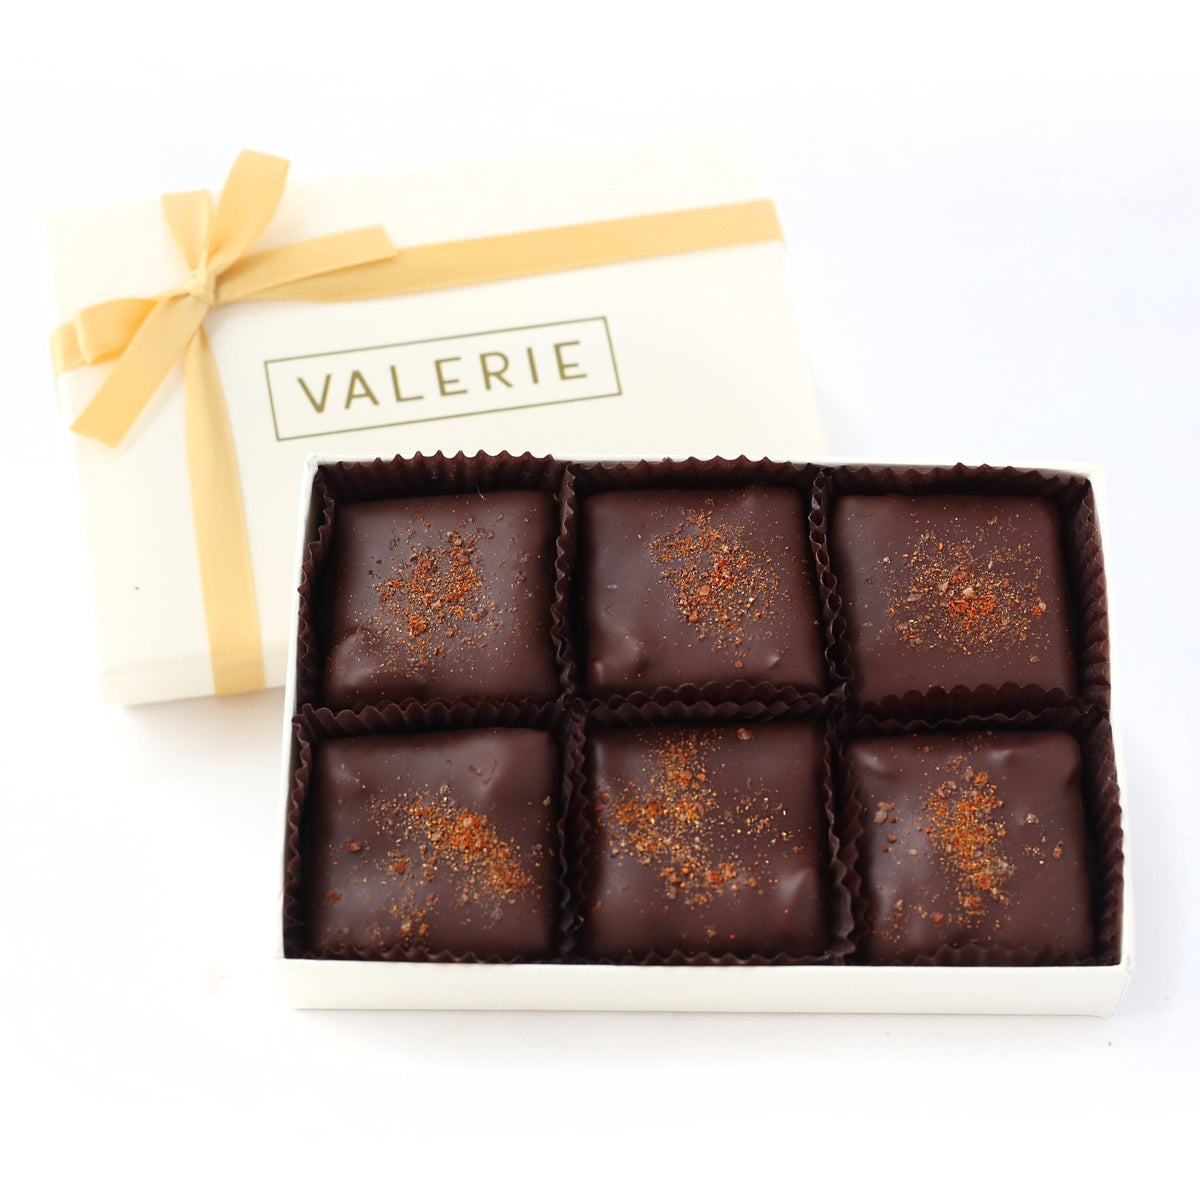 Box of six dark chocolate-covered toffees with paprika and salt sprinkles.